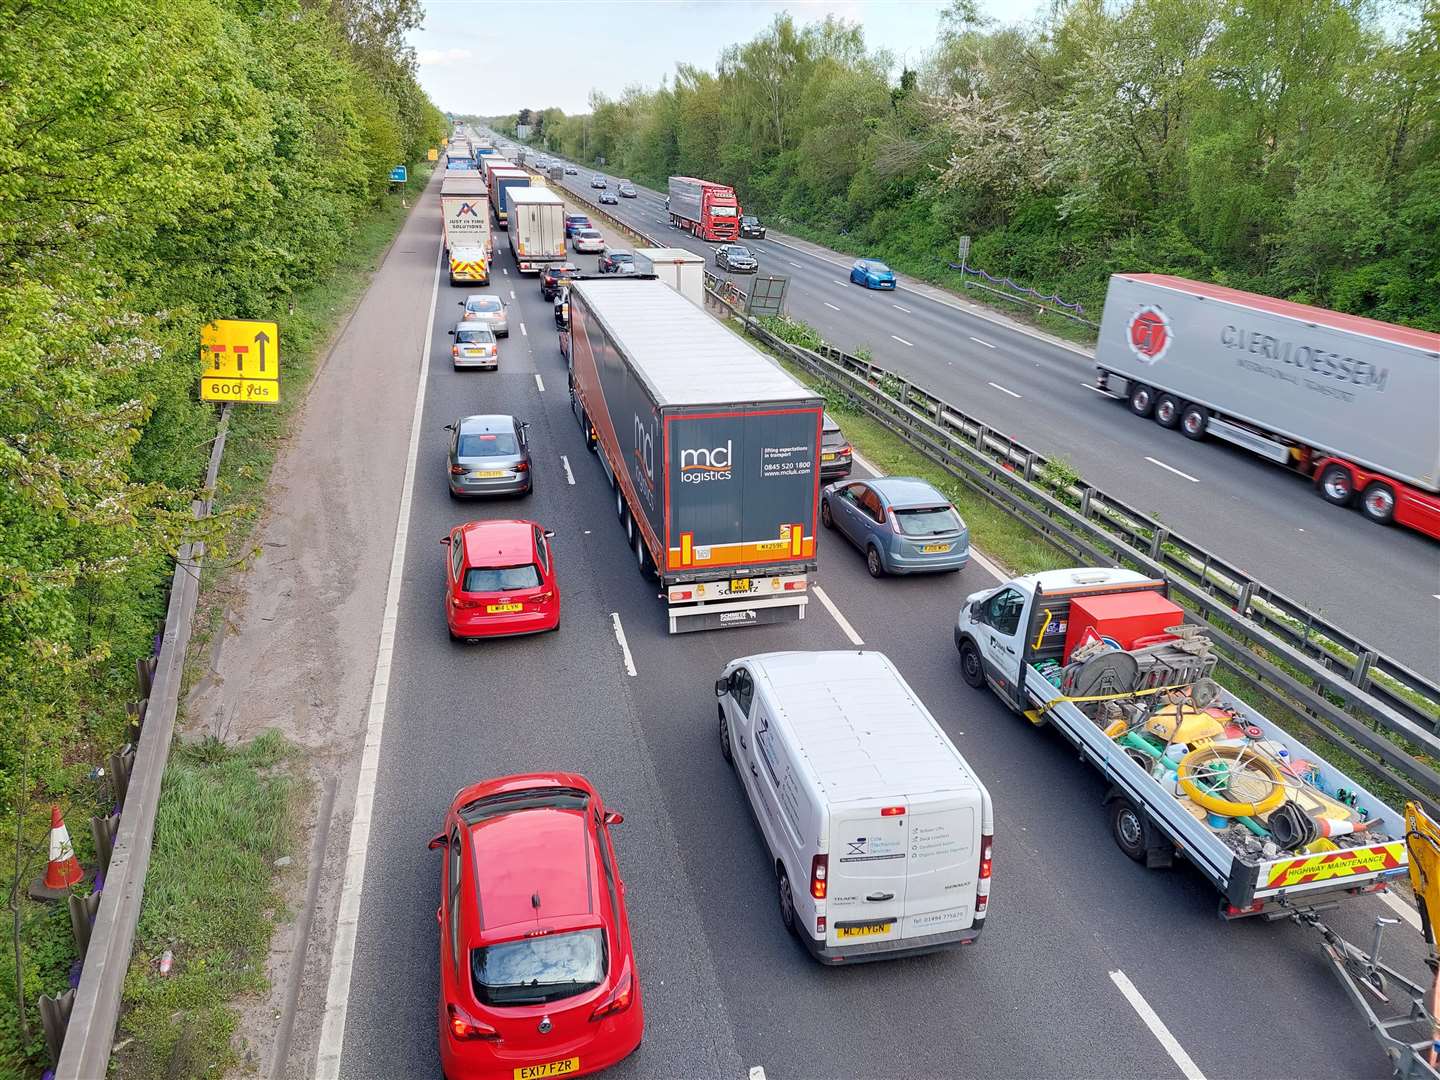 The queues this evening on the approach to the diesel spill site on the coastbound M20 between junctions 9 and 10 at Ashford